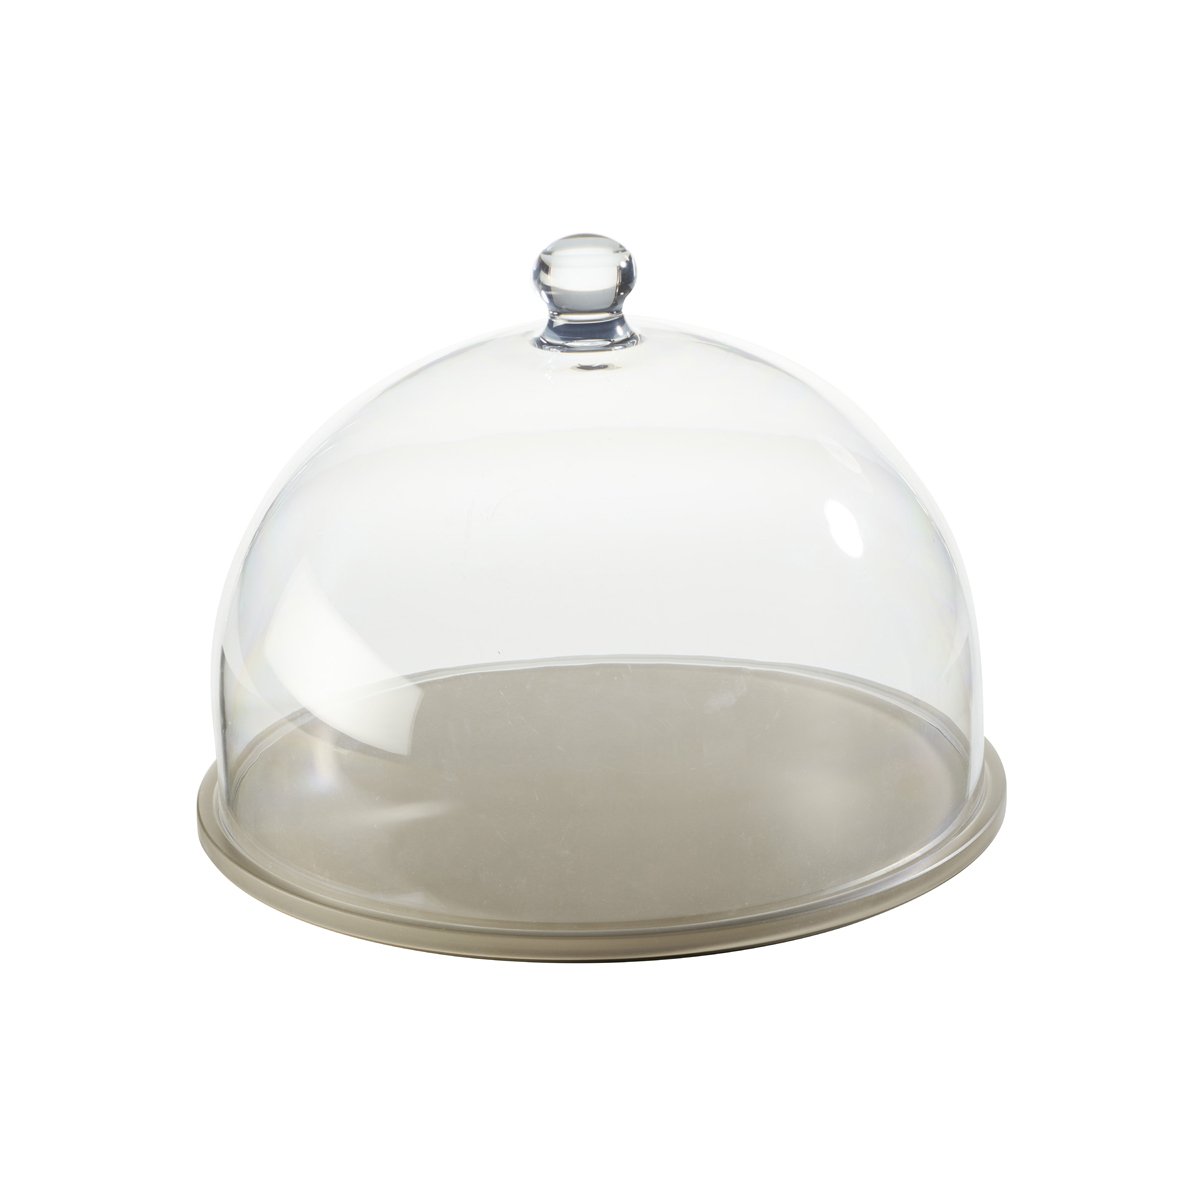 MLP120127 Mealplak Round Tray With Cloche Taupe 330x240mm Tomkin Australia Hospitality Supplies